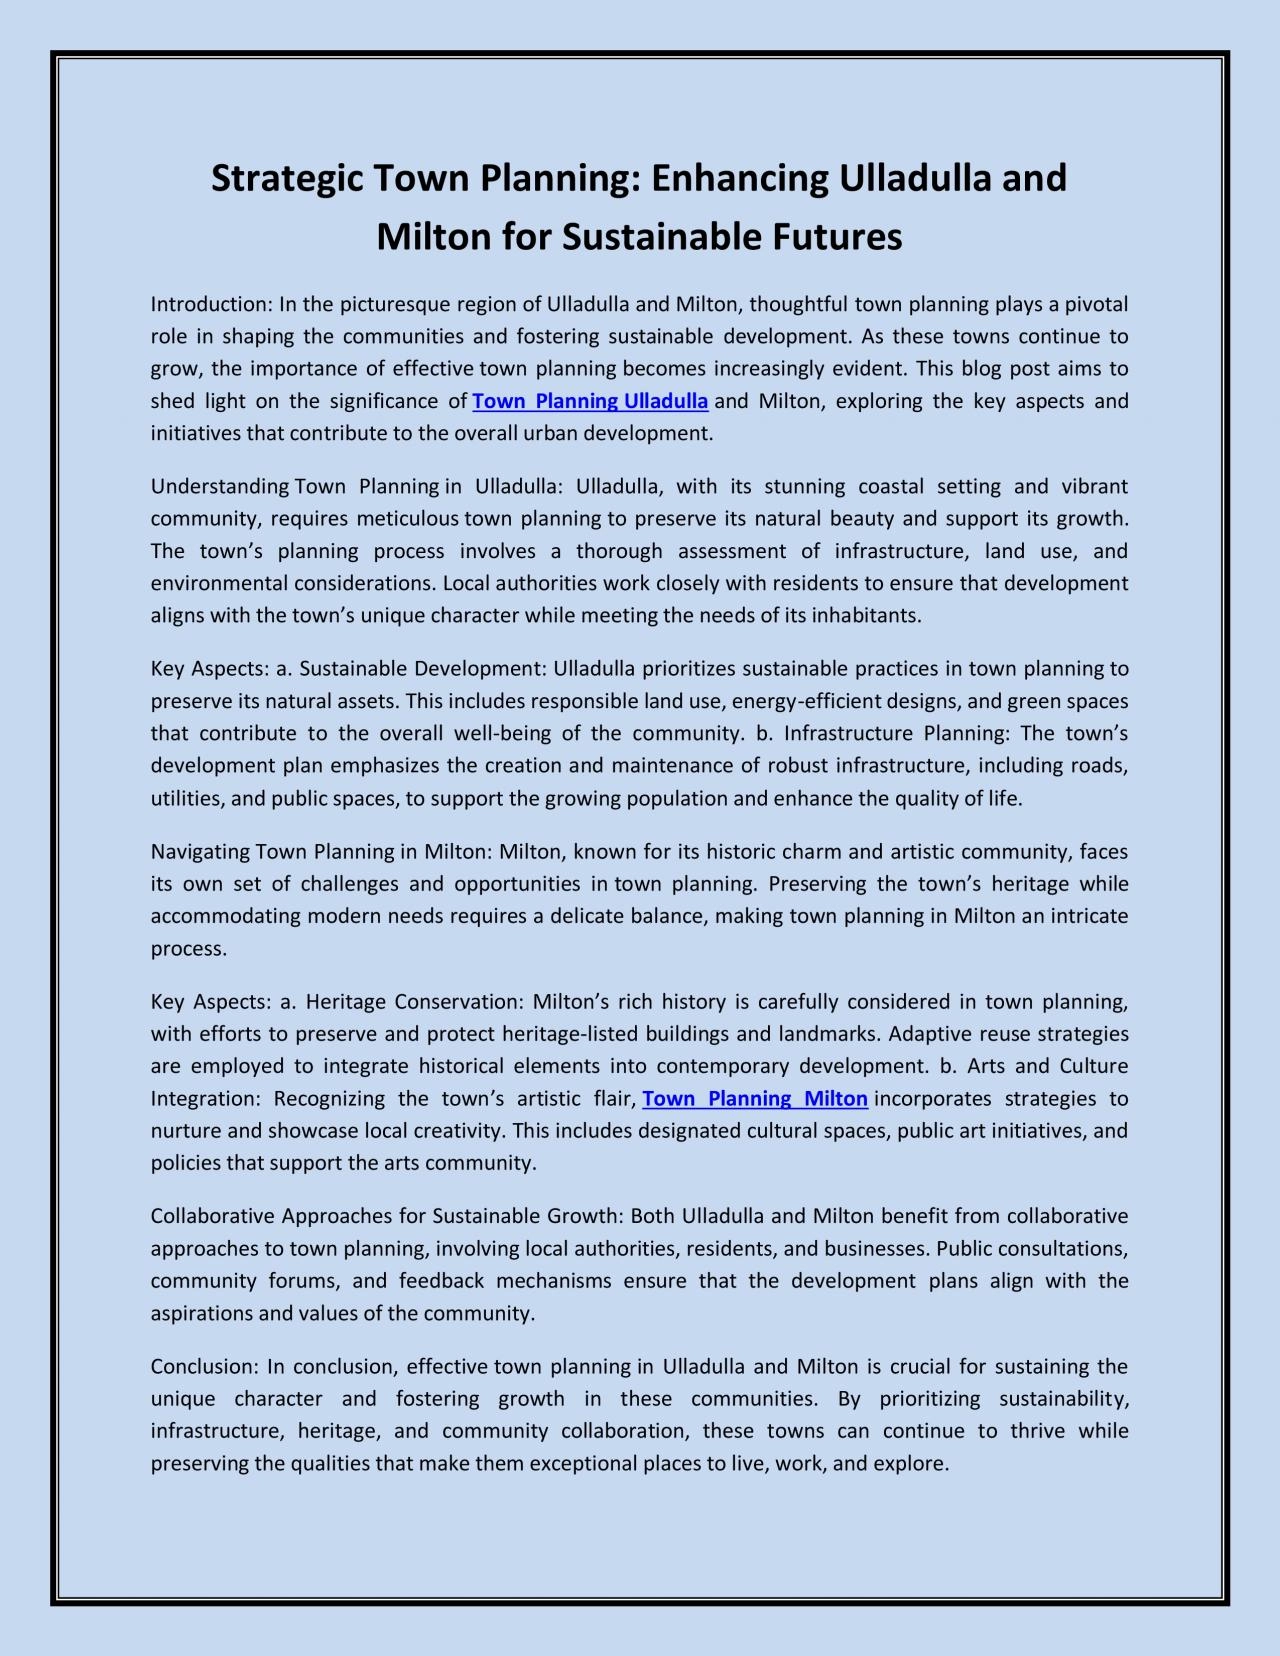 Strategic Town Planning: Enhancing Ulladulla and Milton for Sustainable Futures